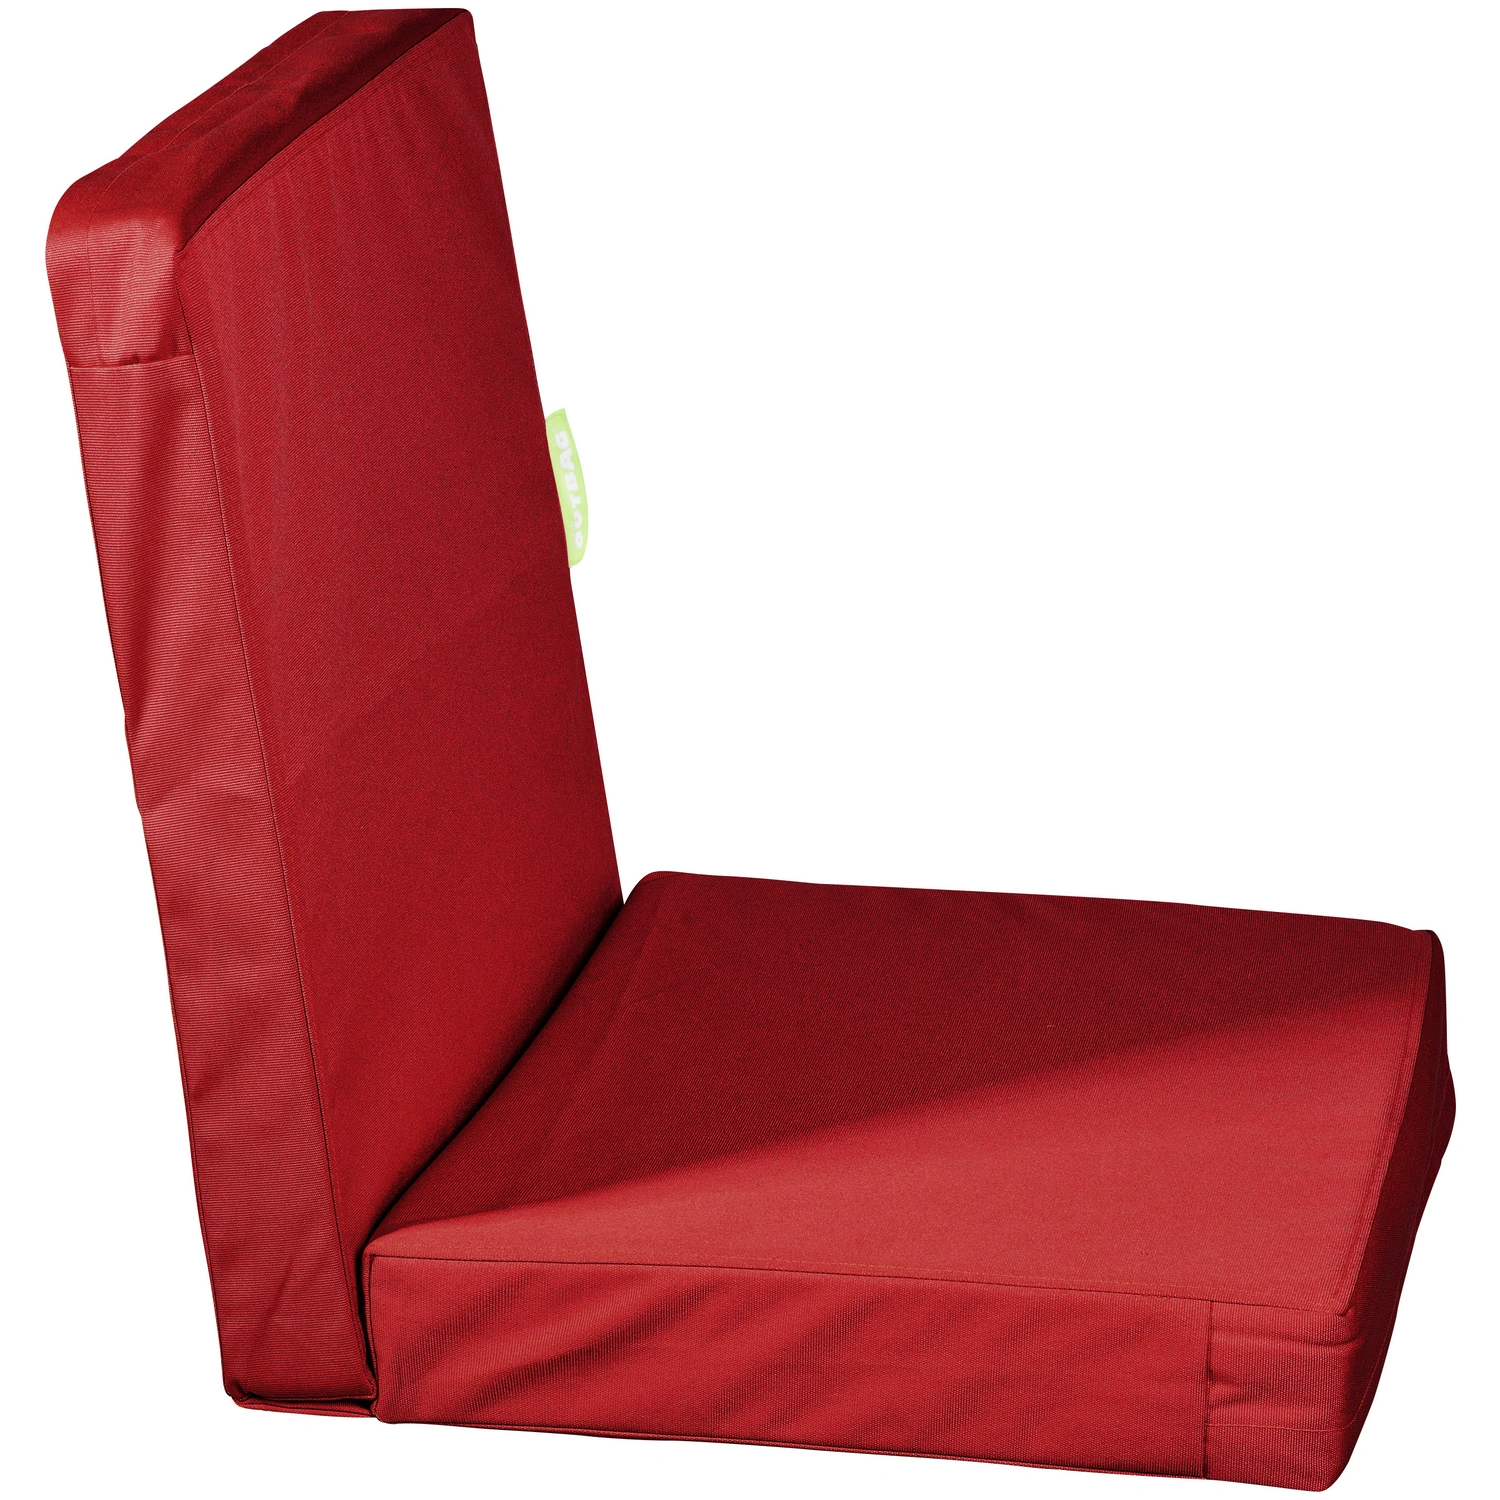 x Plus«, 105 50 BxL: »HighRise cm OUTBAG Sesselauflage rot,